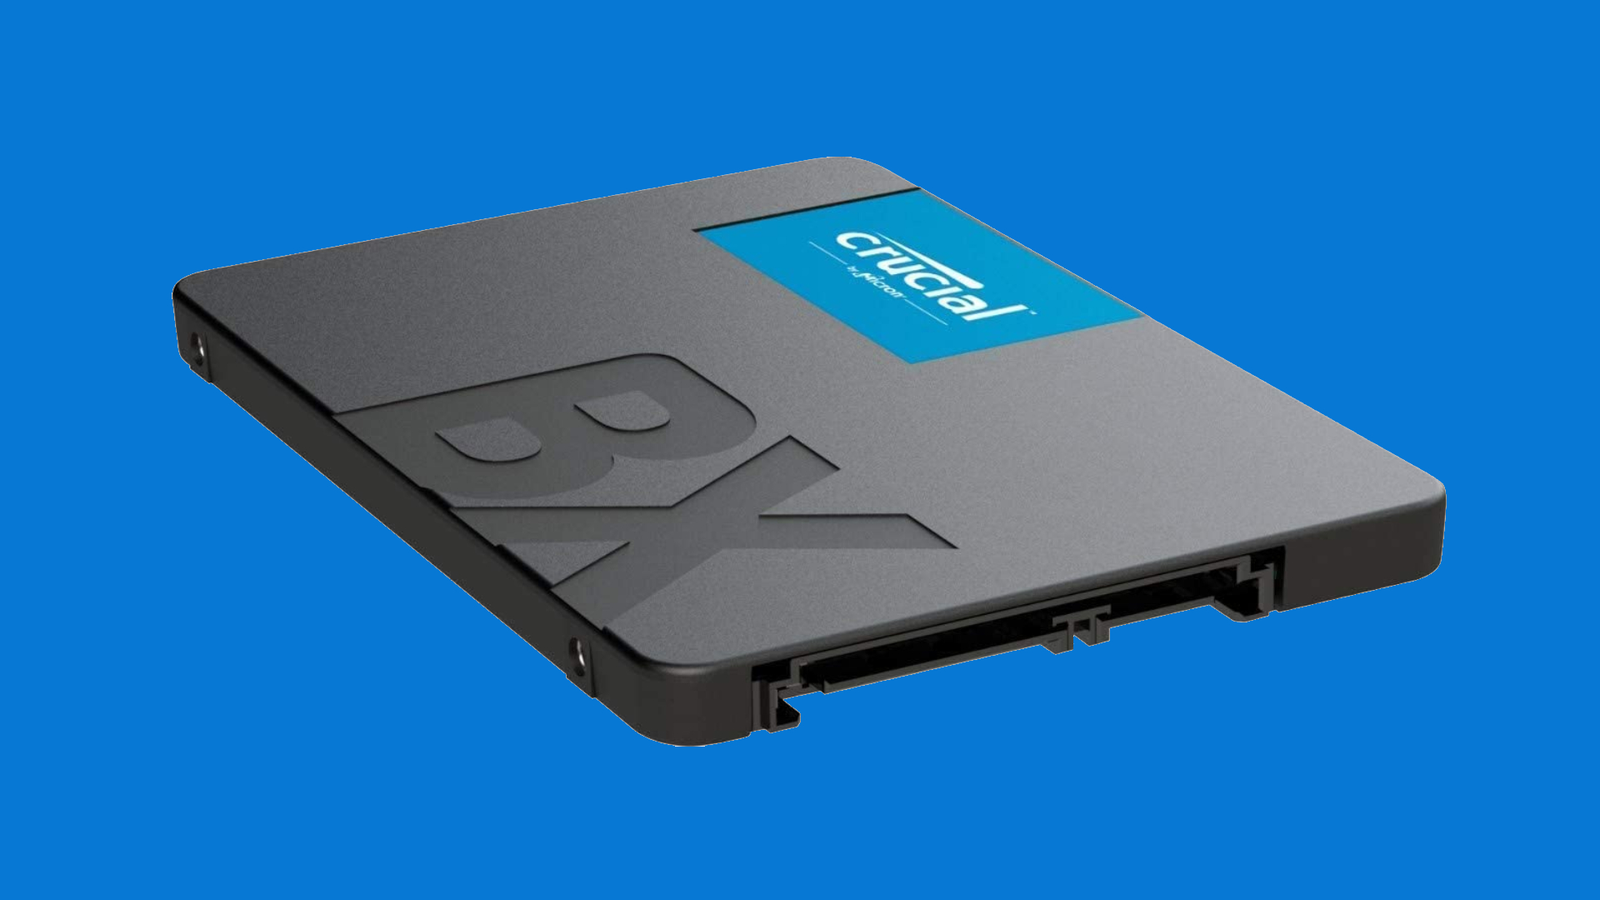 The reliable Crucial BX500 SATA SSD is now its lowest-ever-price on